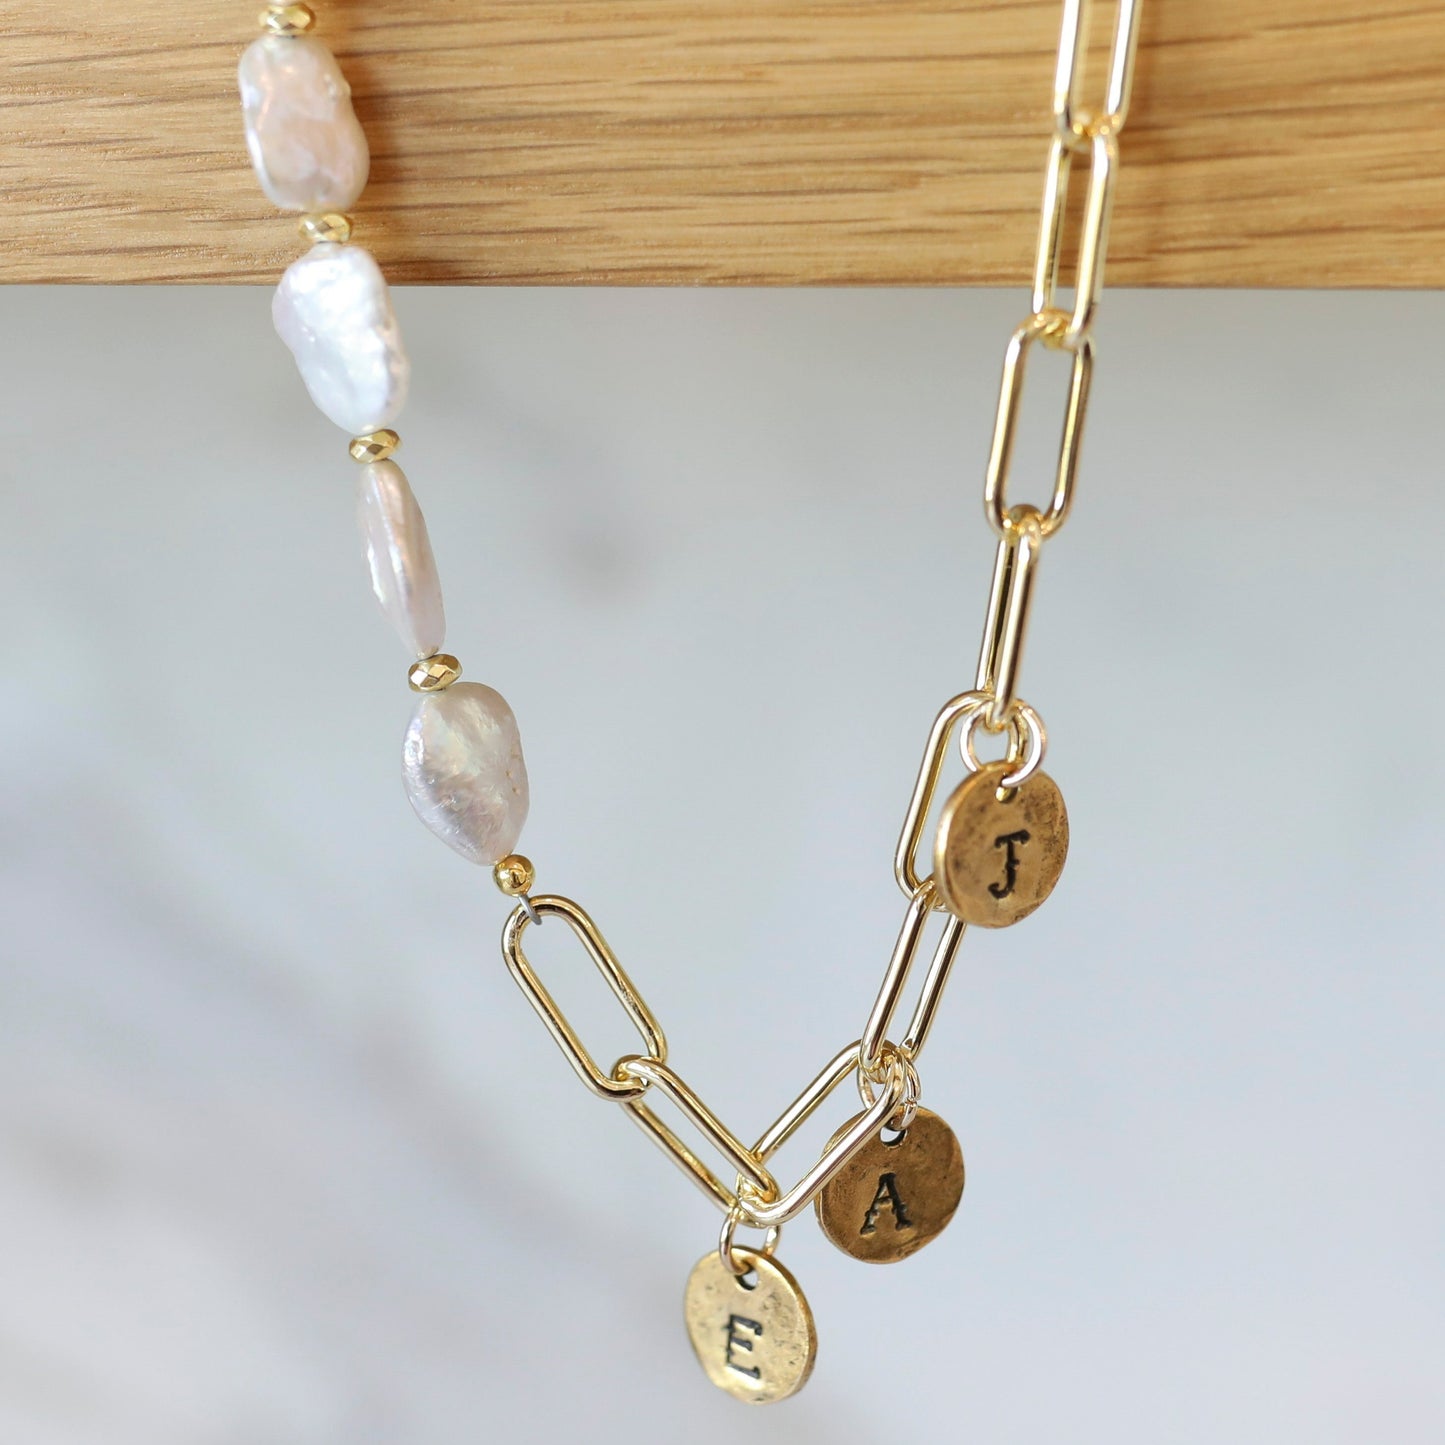 Personalized Asymmetrical Pearl Charm Necklace in Gold